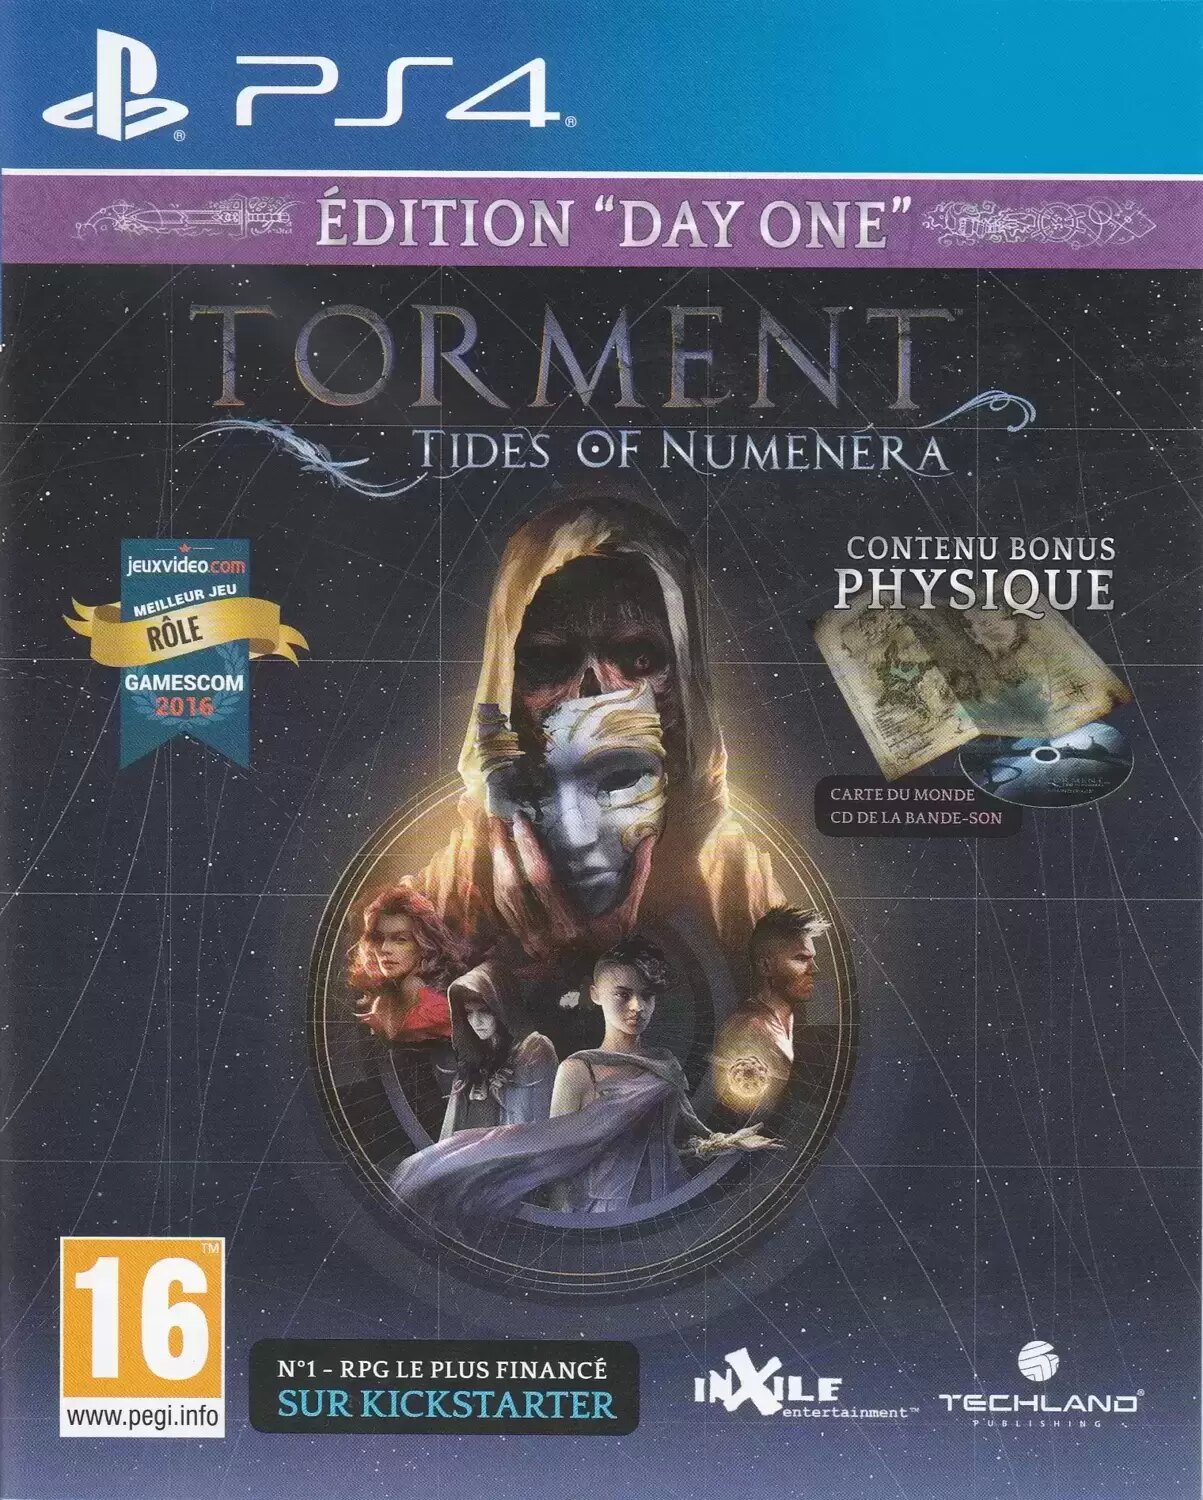 PS4 Games - Torment - Tides of Numenéra Day One Edition